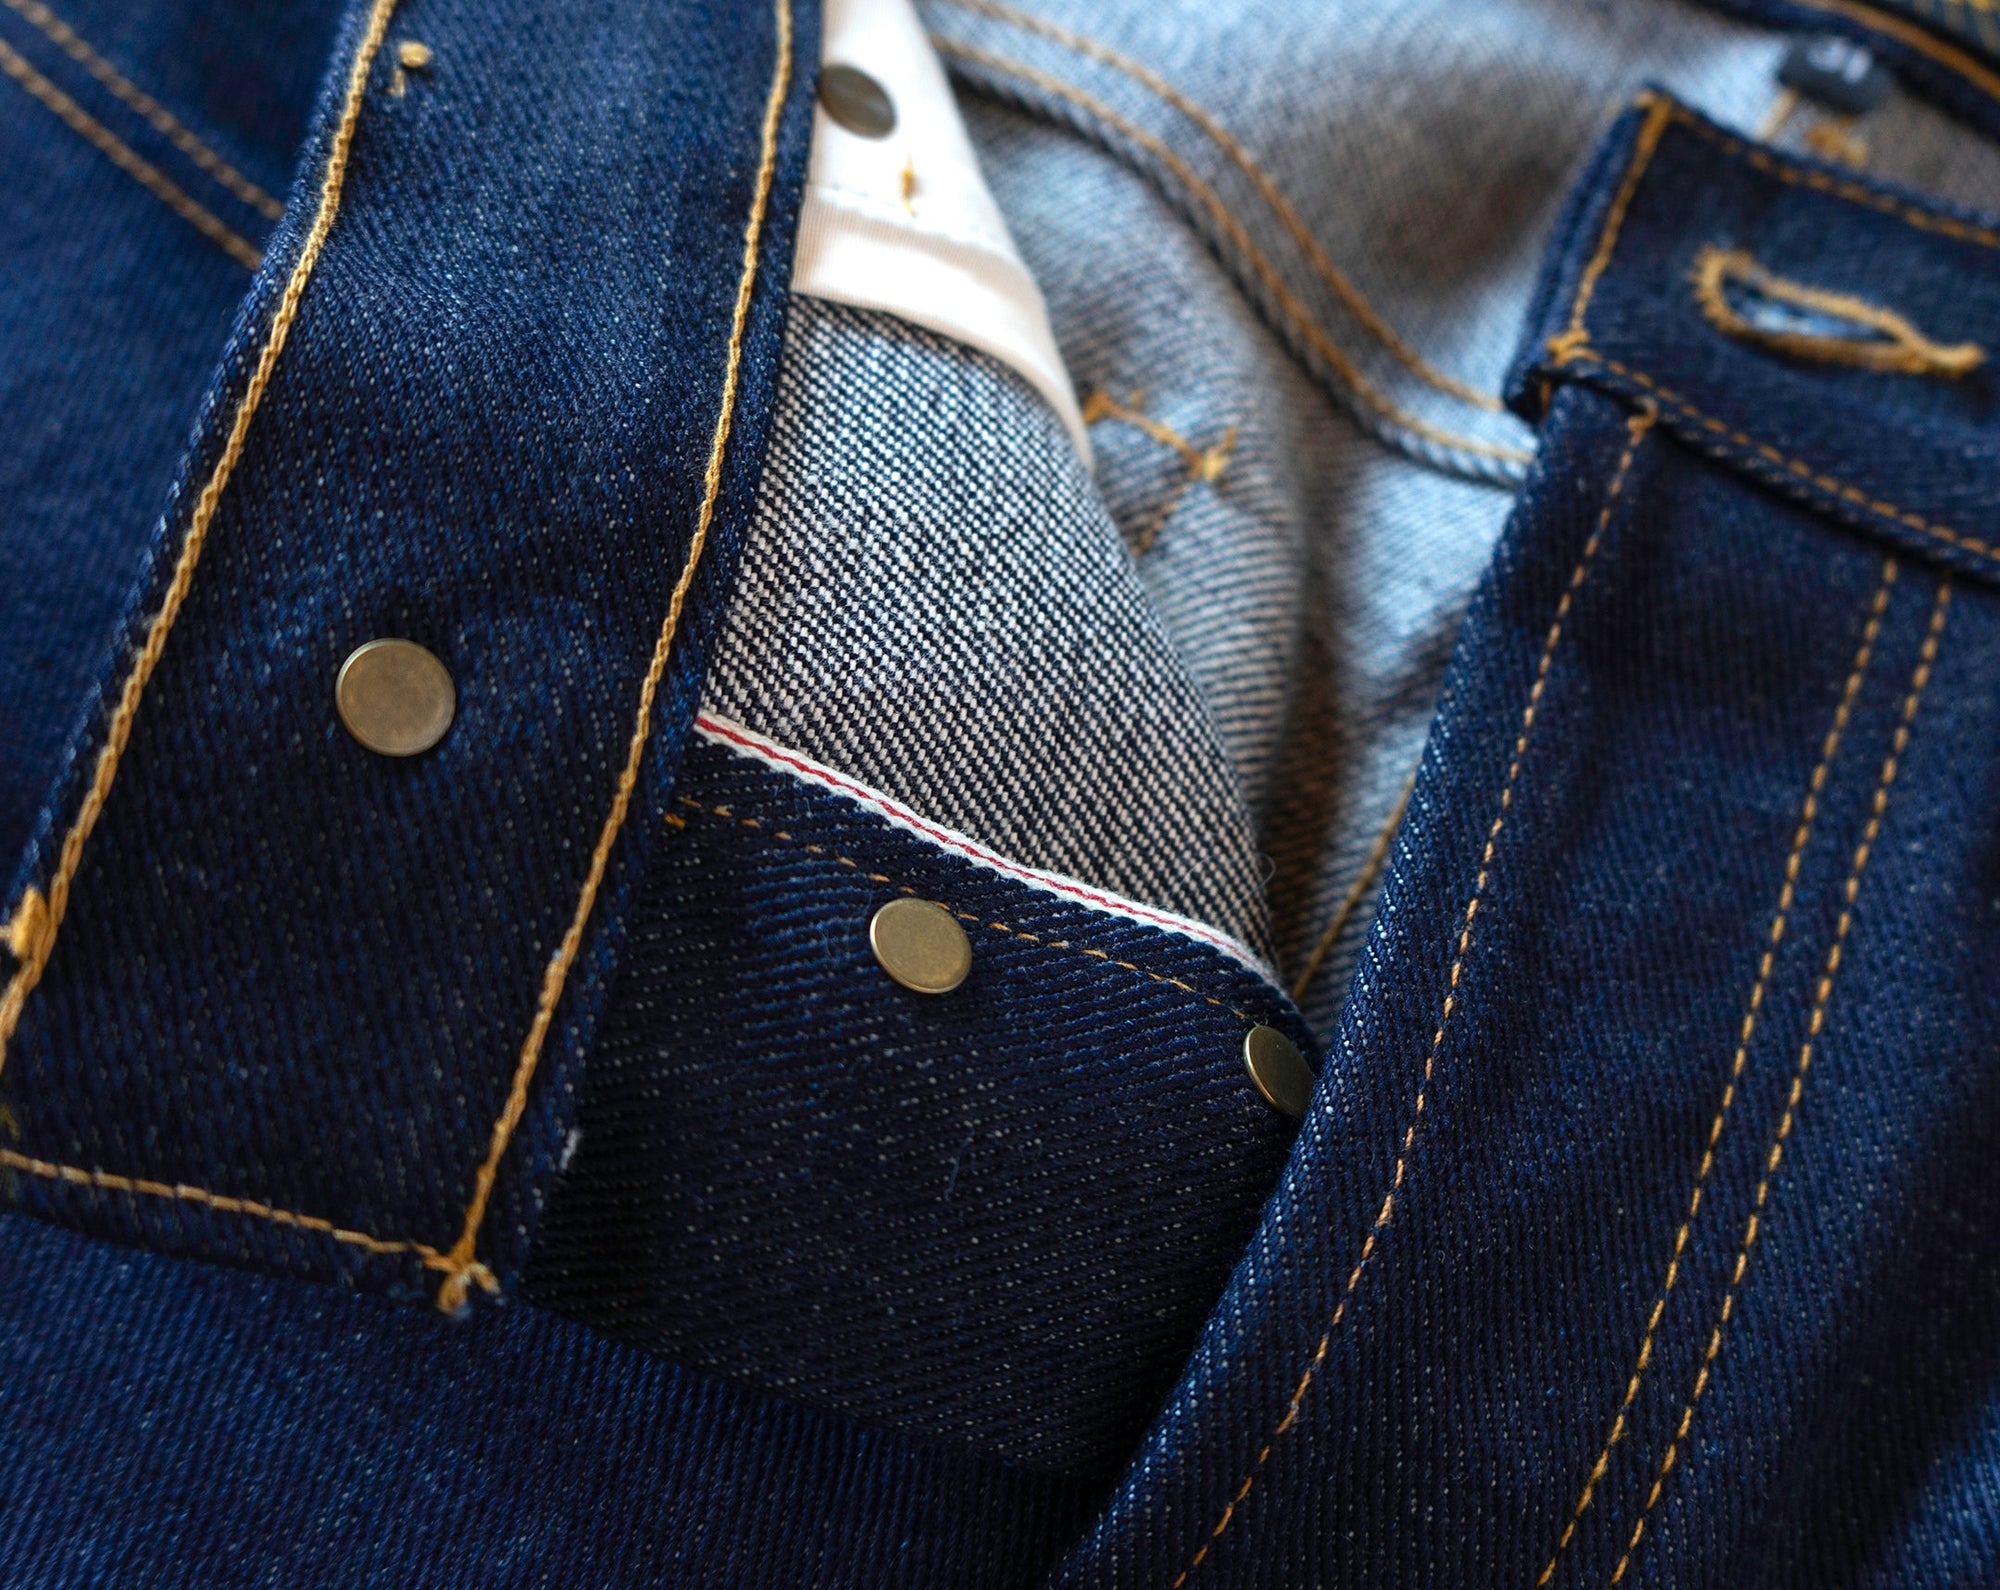 A More Focused Update of the 21.5 oz BRAVESTAR Selvedge 